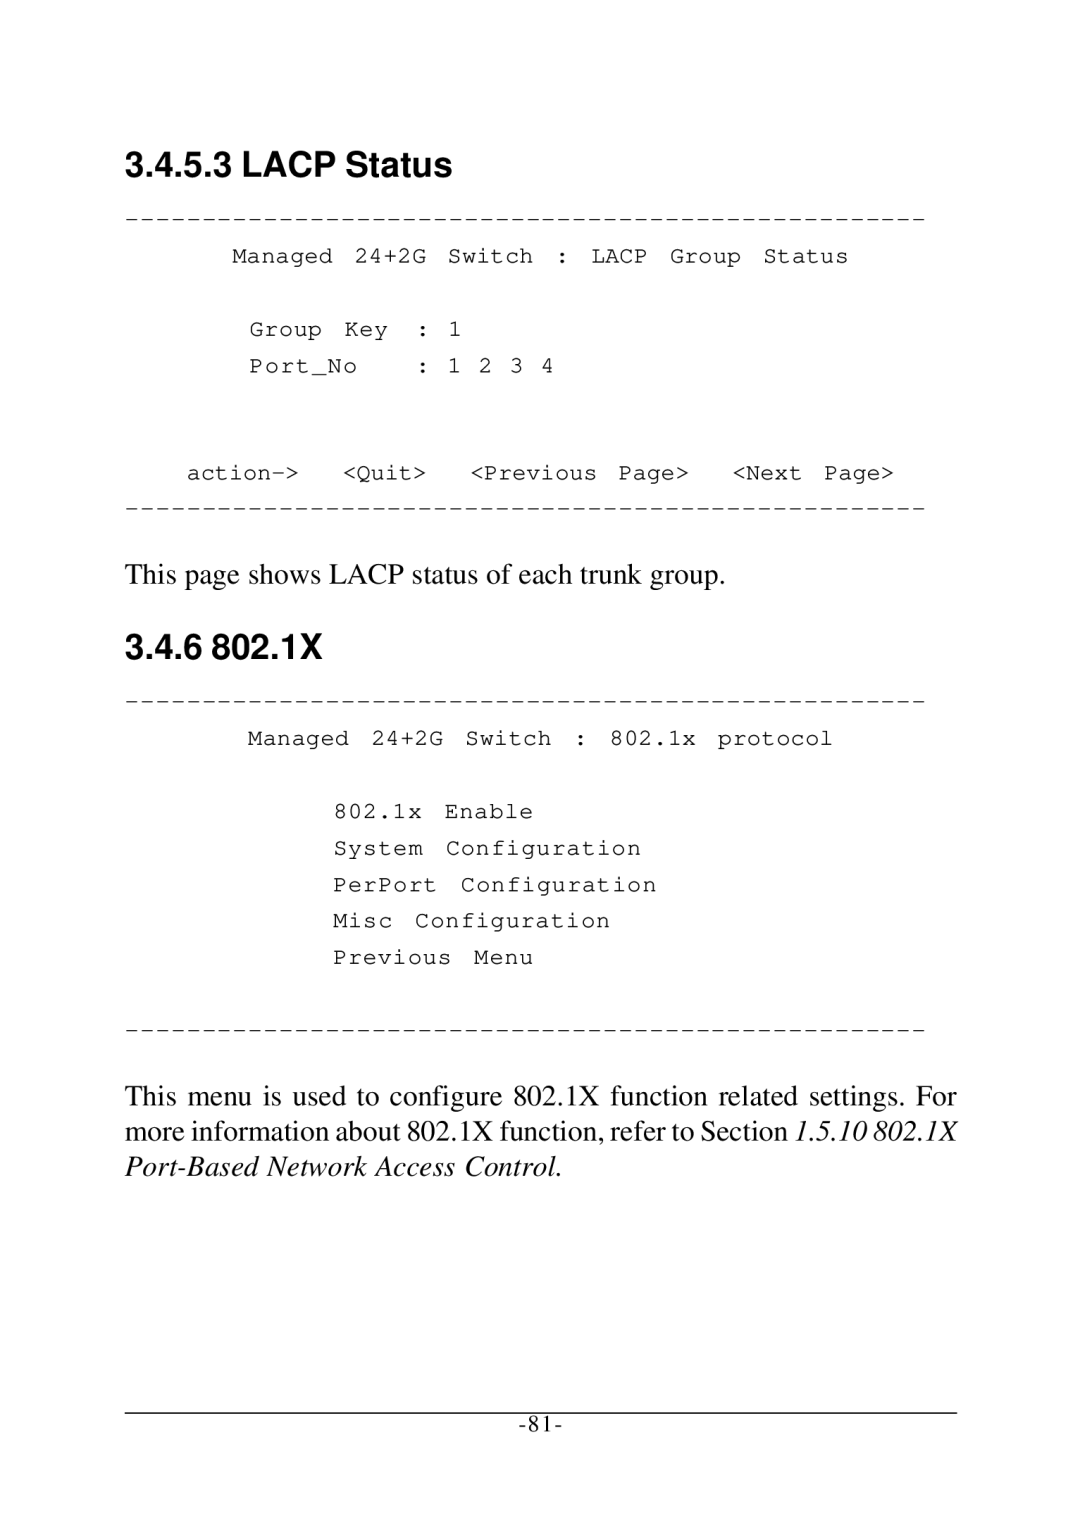 KTI Networks KS-2260 operation manual Lacp Status, This page shows Lacp status of each trunk group 